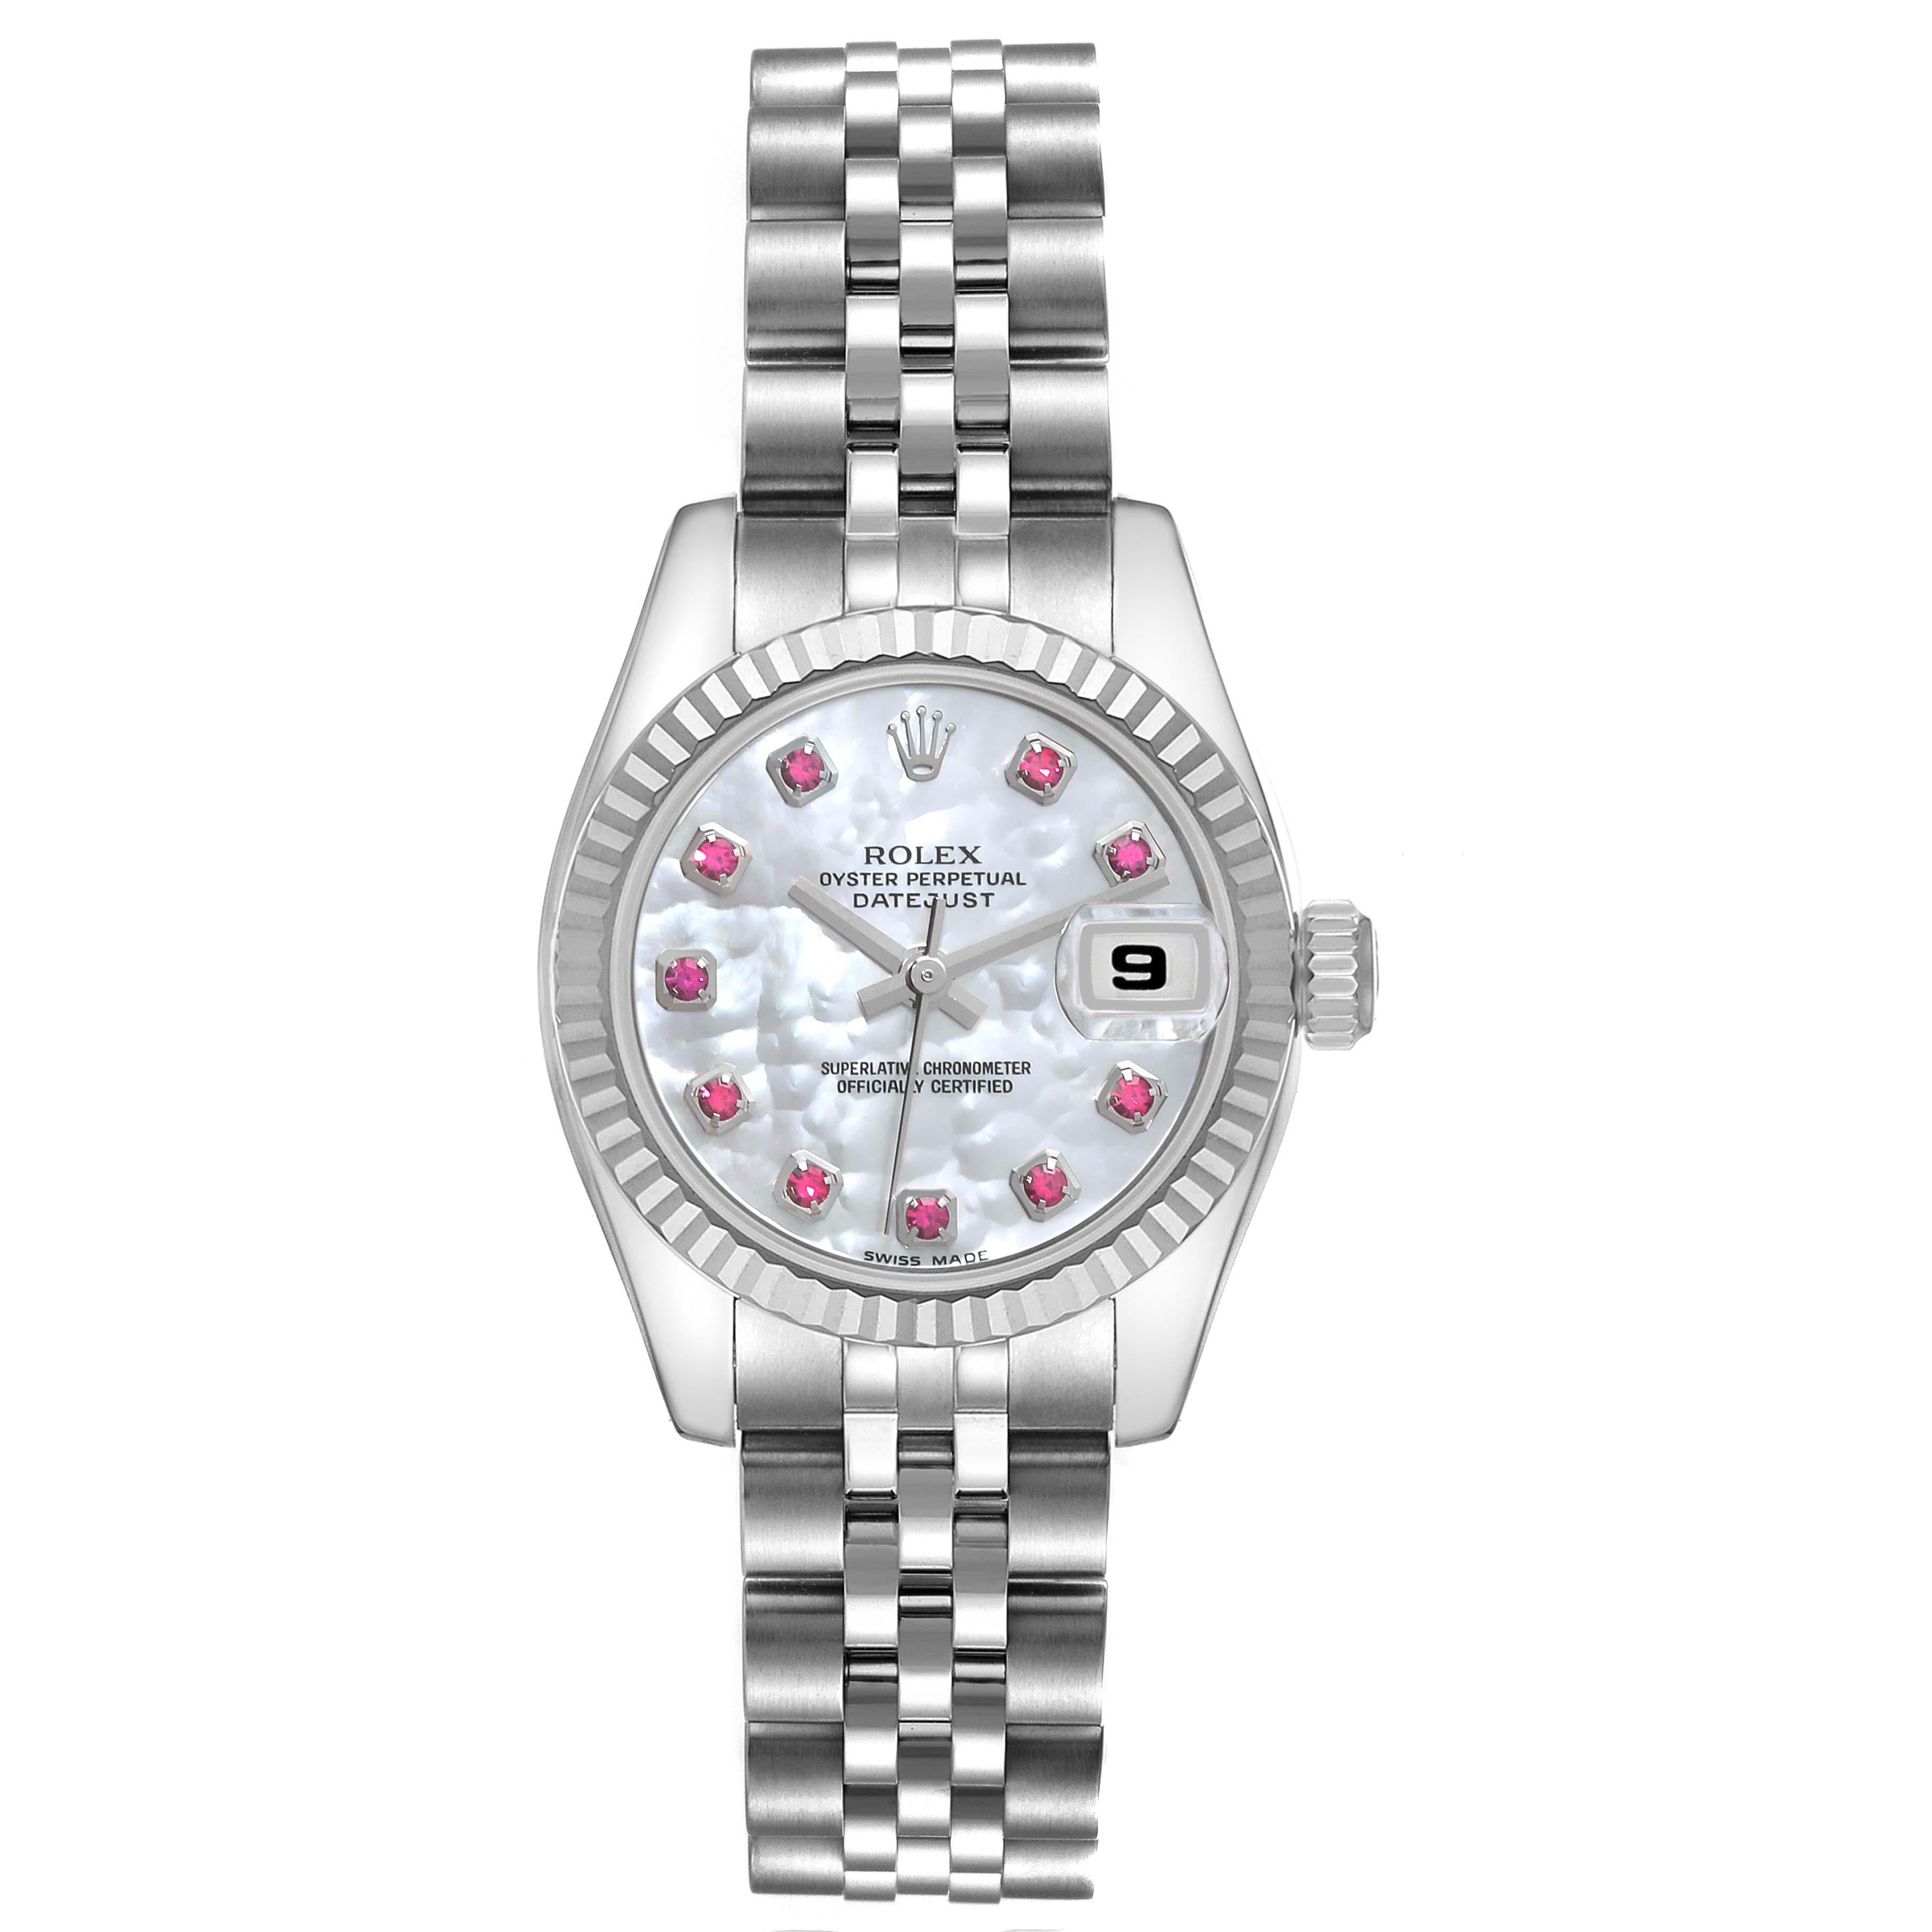 Rolex Datejust Steel White Gold Mother of Pearl Ruby Dial Ladies Watch 179174. Officially certified chronometer self-winding movement. Stainless steel oyster case 26.0 mm in diameter. Rolex logo on the crown. 18K white gold fluted bezel. Scratch